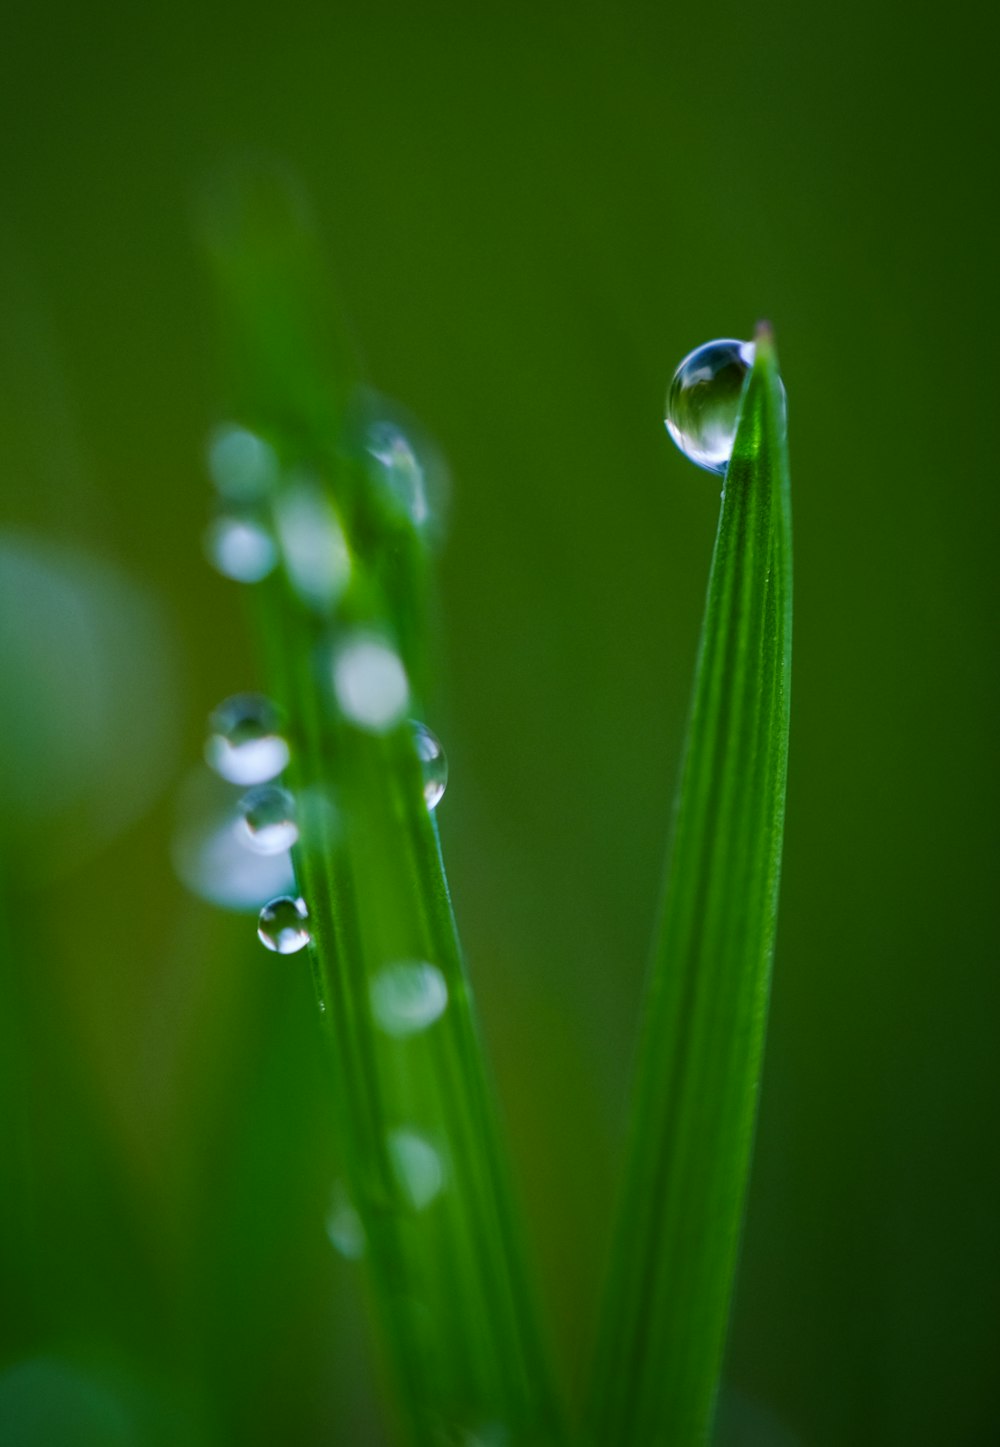 Dew drops on green leaves photo – Free Wet Image on Unsplash